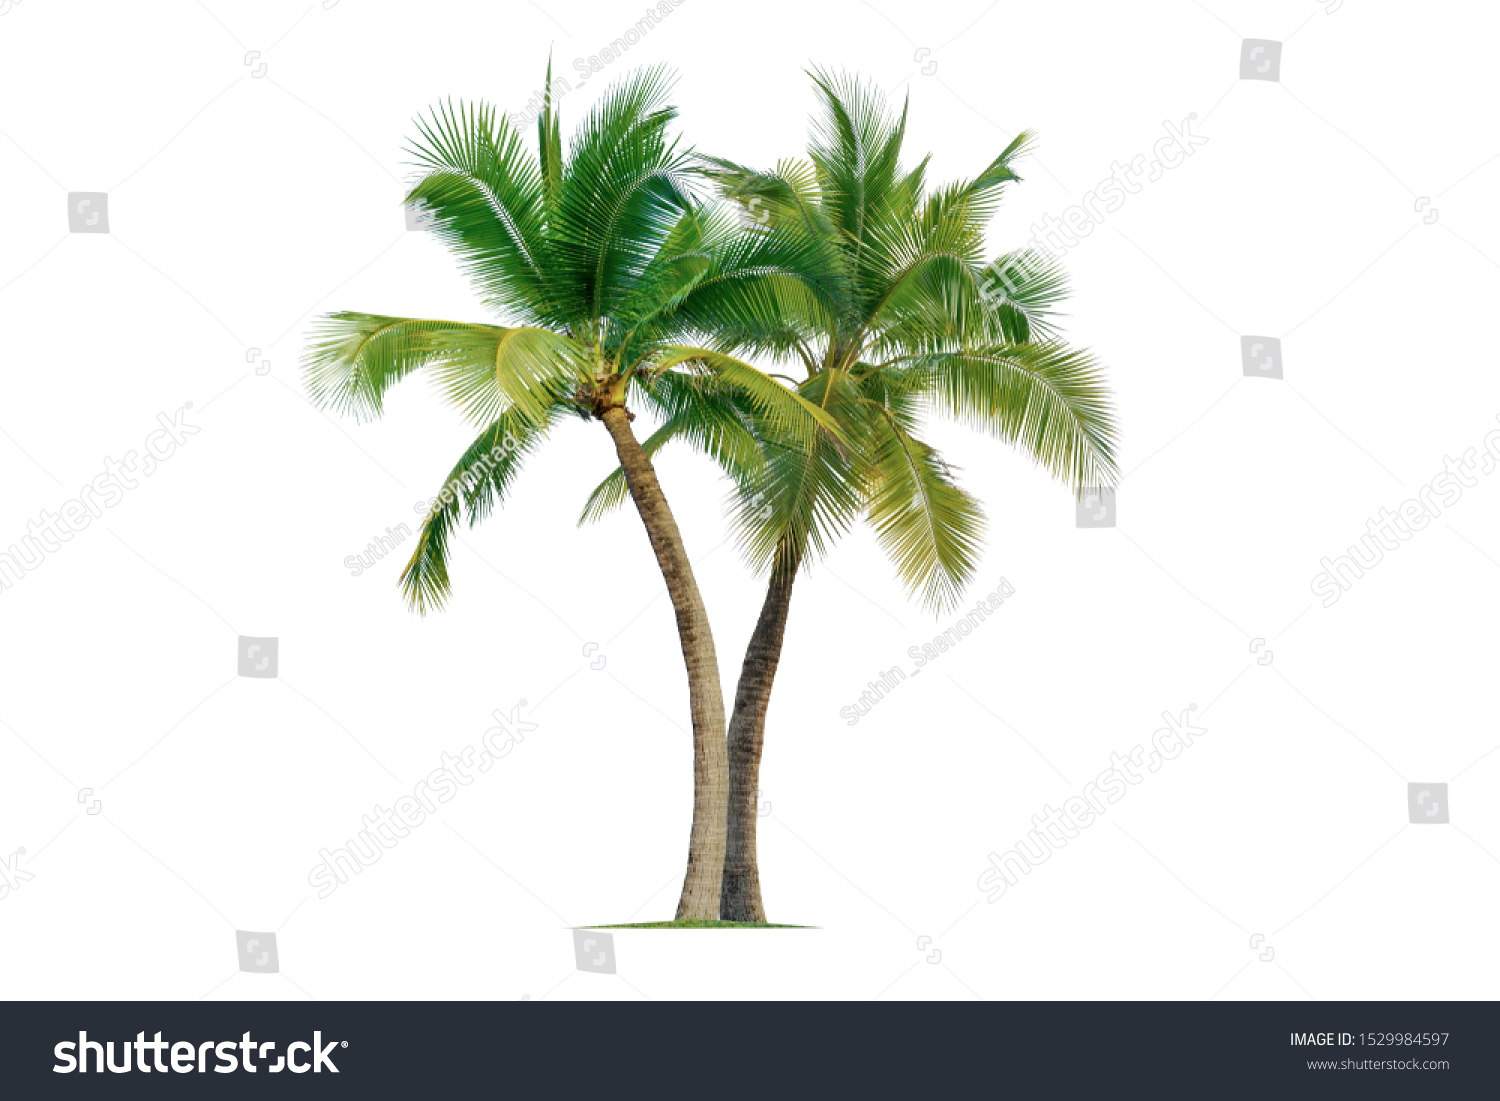 Coconut palm tree isolated on white background. #1529984597